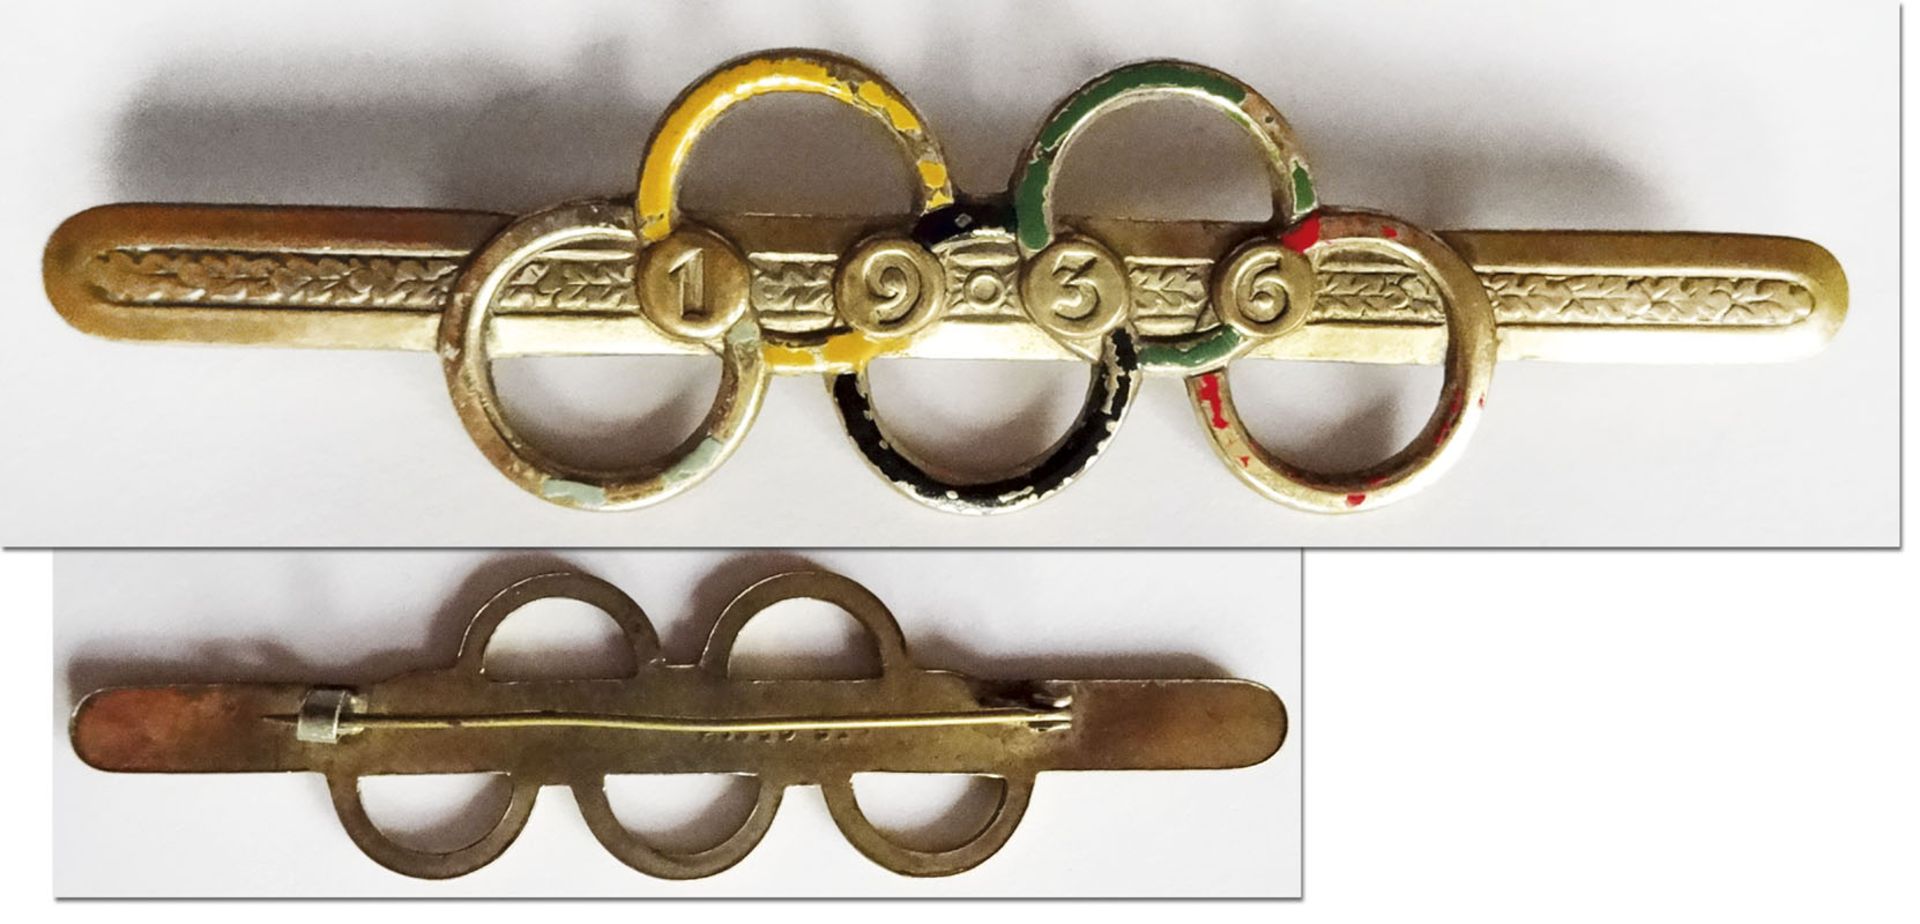 Olympic Games 1936 Golden Brooch - Gilded commemorative Brooch with the year 1936 and four-color ena